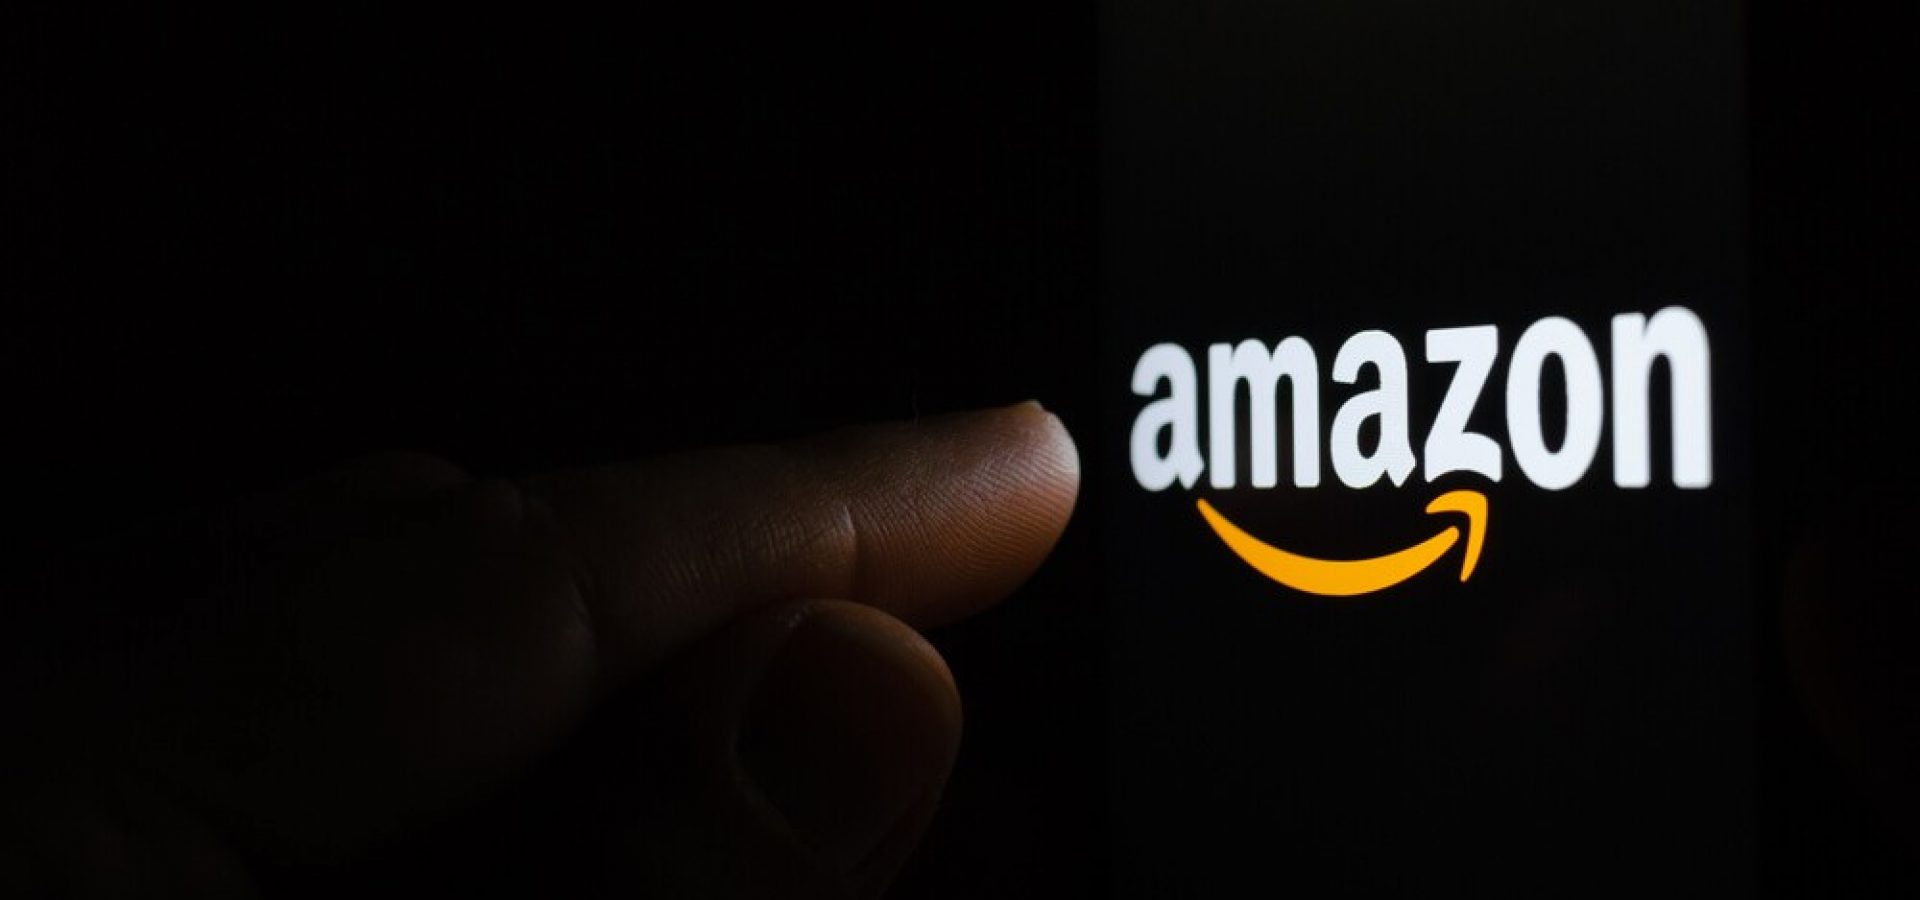 Finger touching Amazon logo on a screen in a dark.